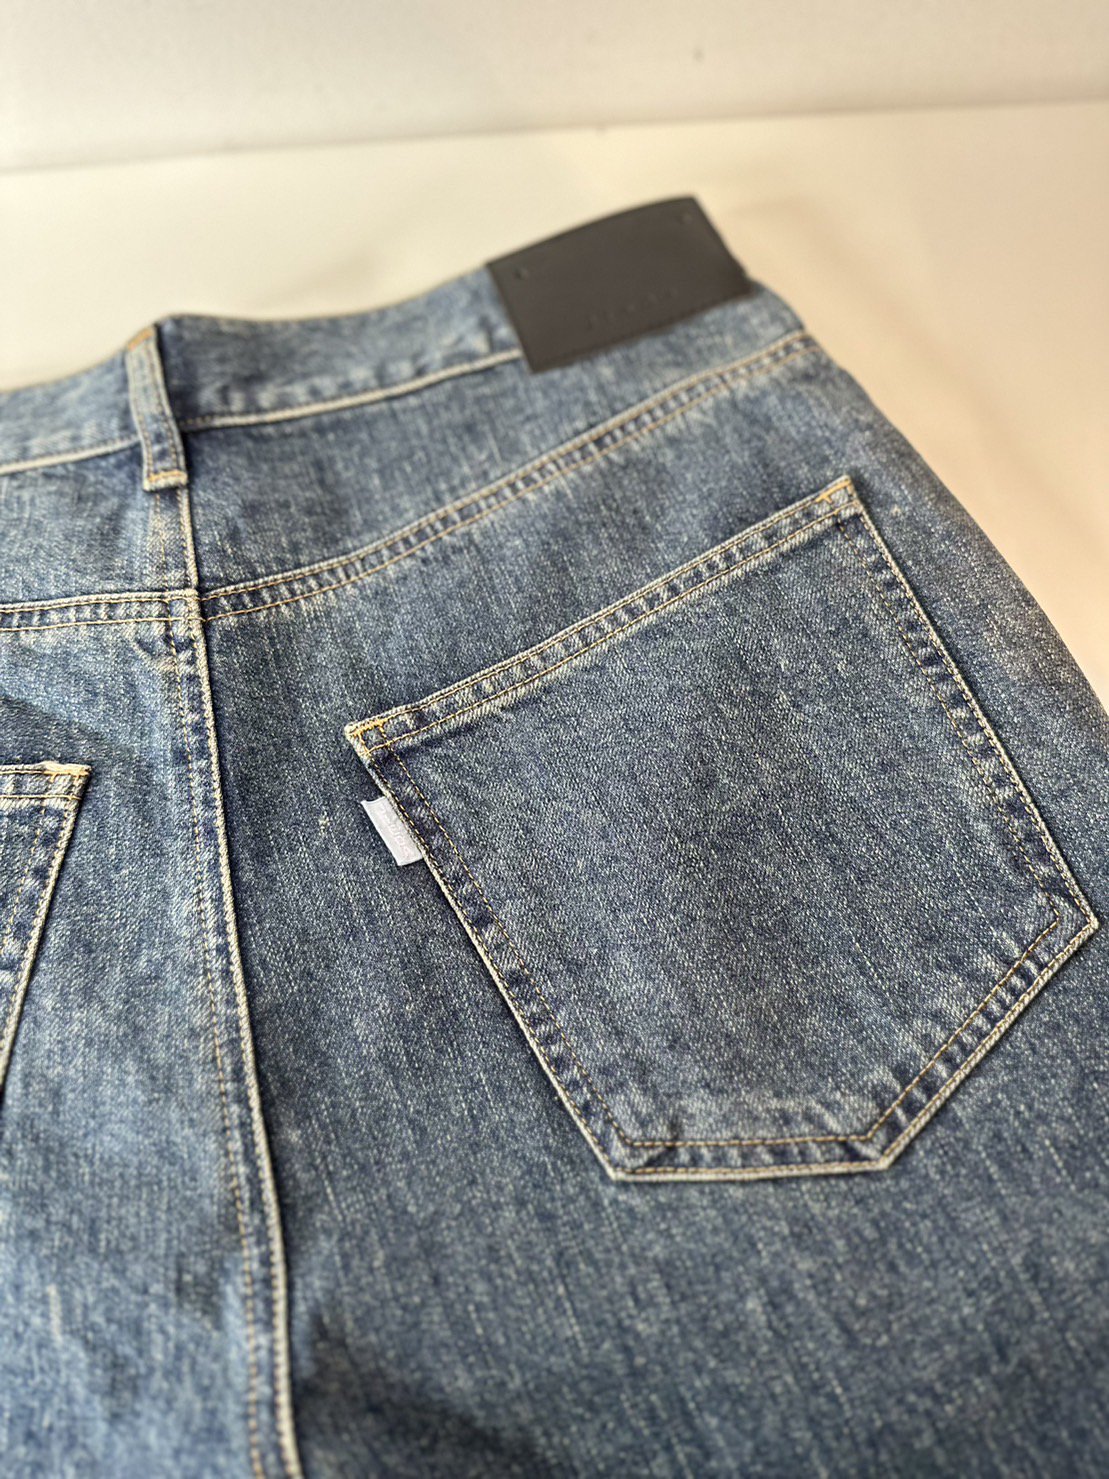 JieDa<br />CUTTING WIDE DENIM / INDOGO<img class='new_mark_img2' src='https://img.shop-pro.jp/img/new/icons14.gif' style='border:none;display:inline;margin:0px;padding:0px;width:auto;' />